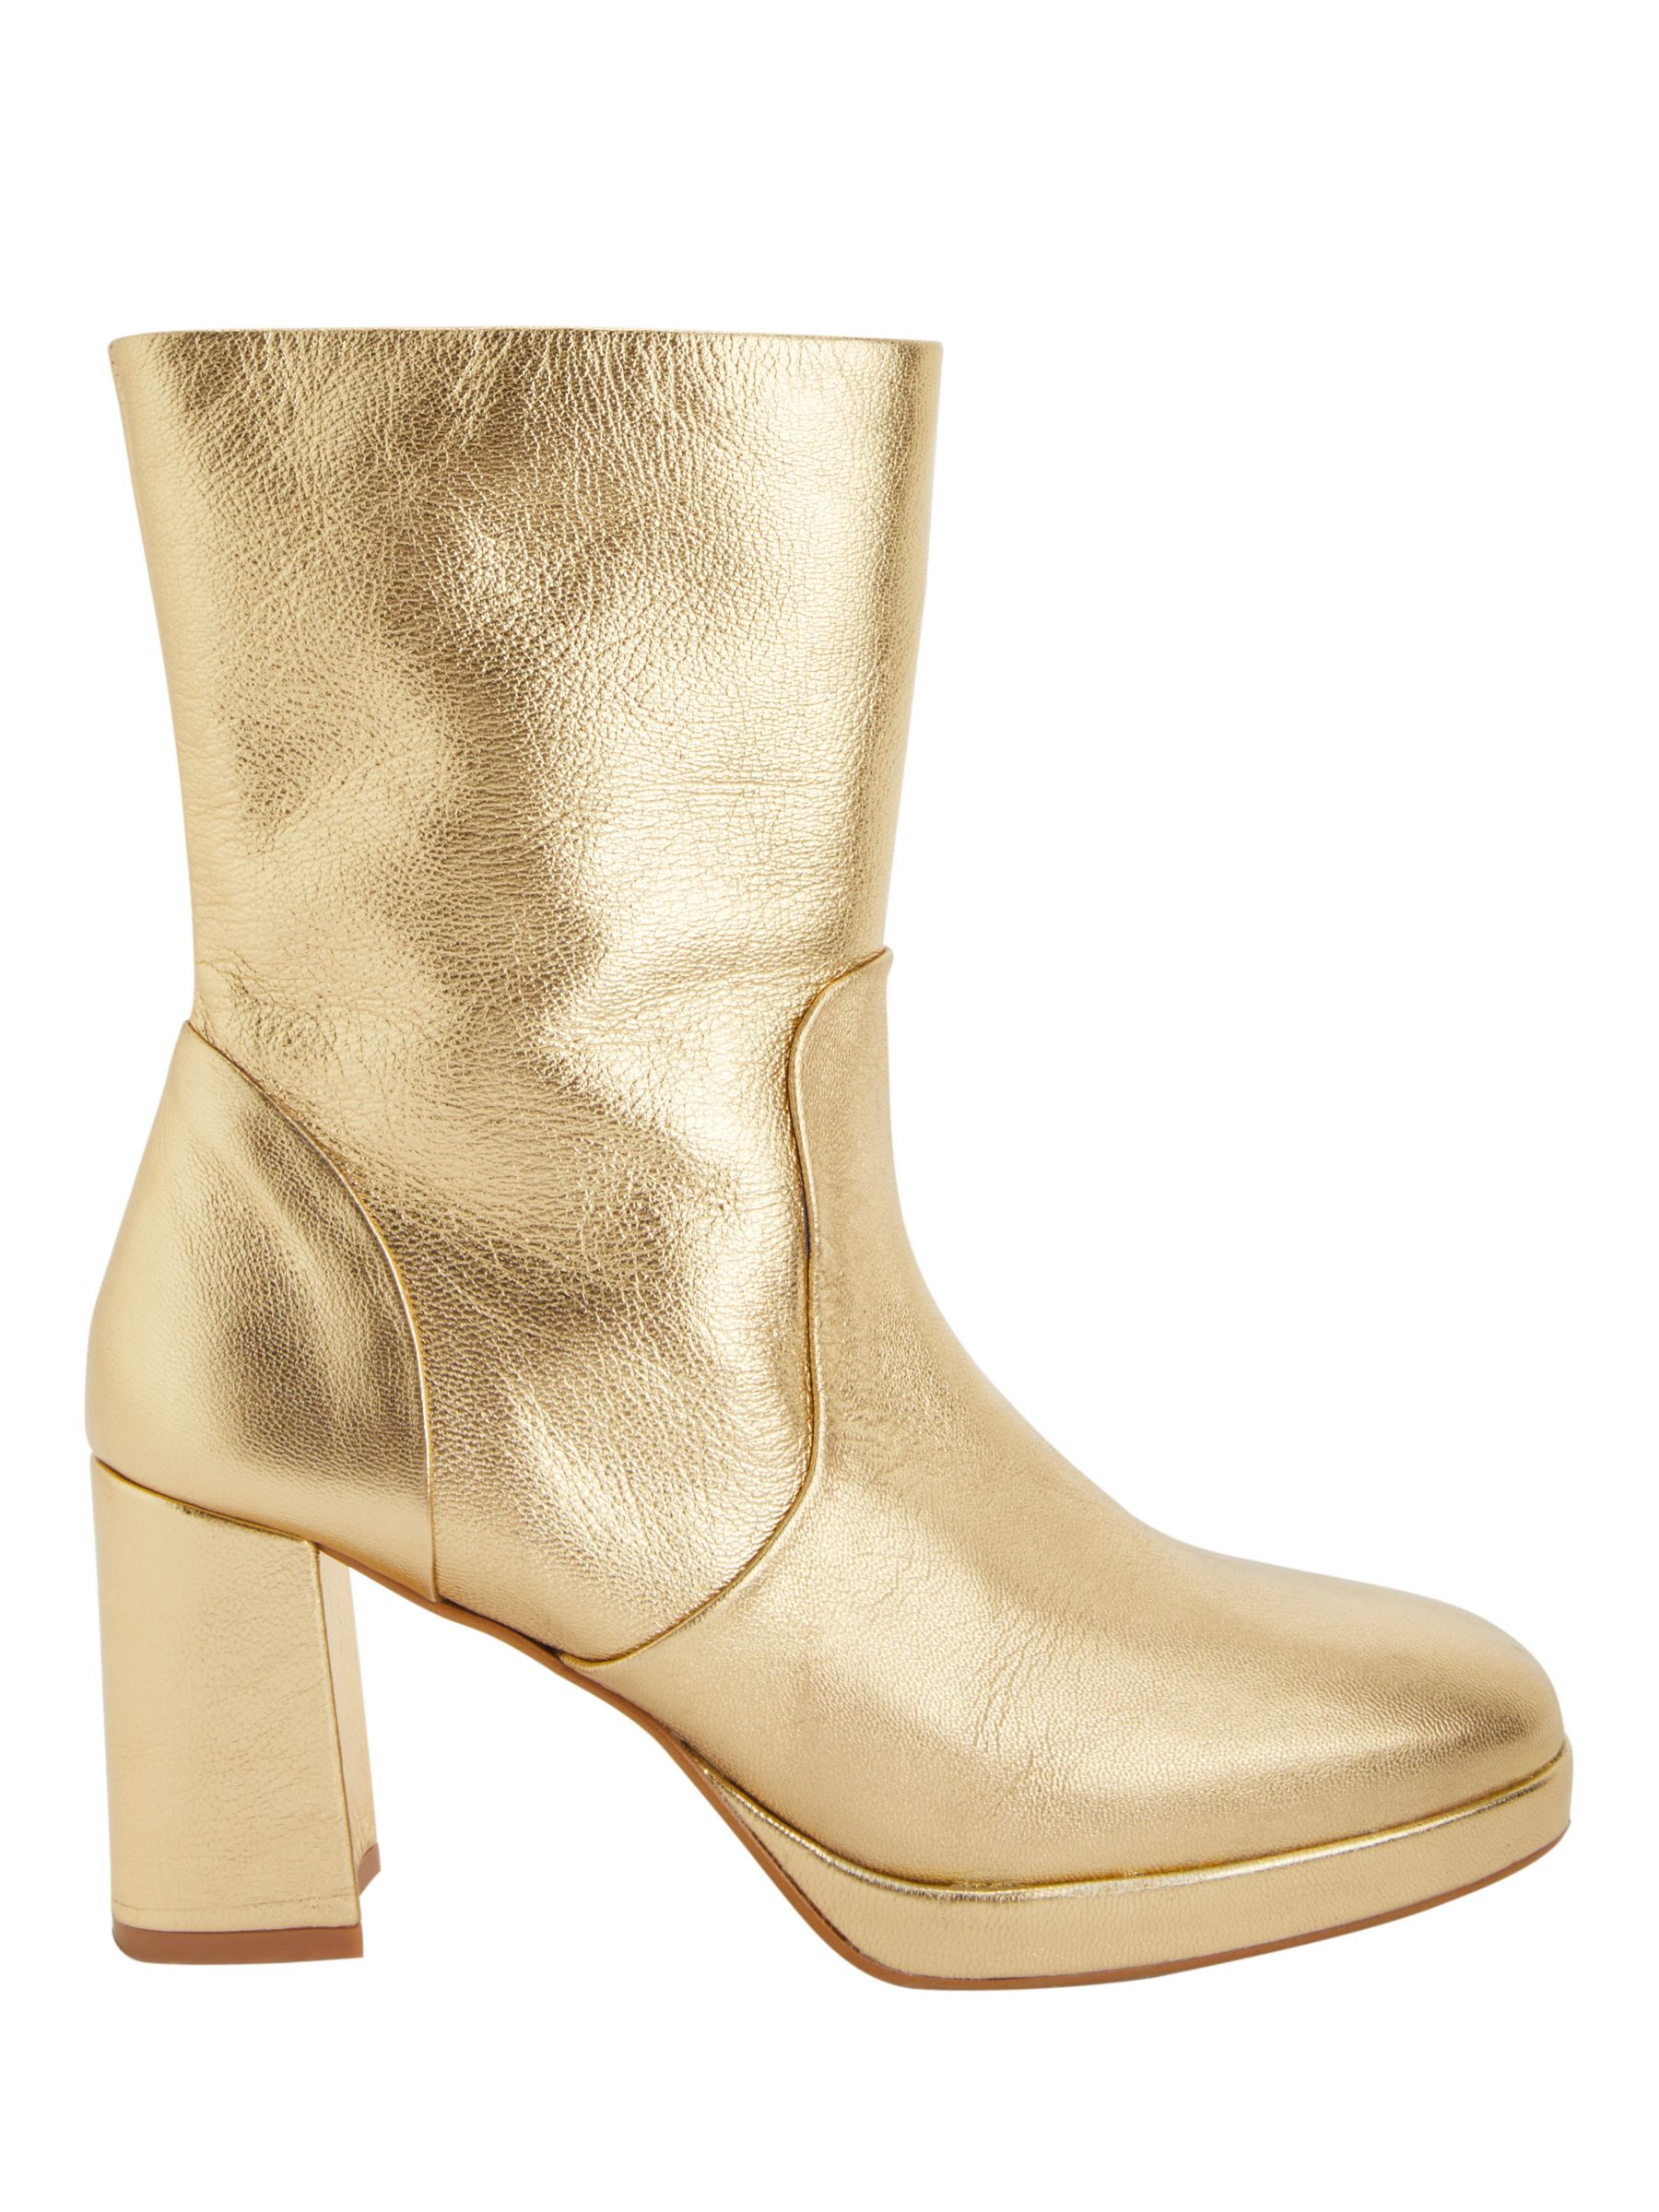 John Lewis + Erica Davies Vaughan Leather Platform Ankle Boots, Gold at ...